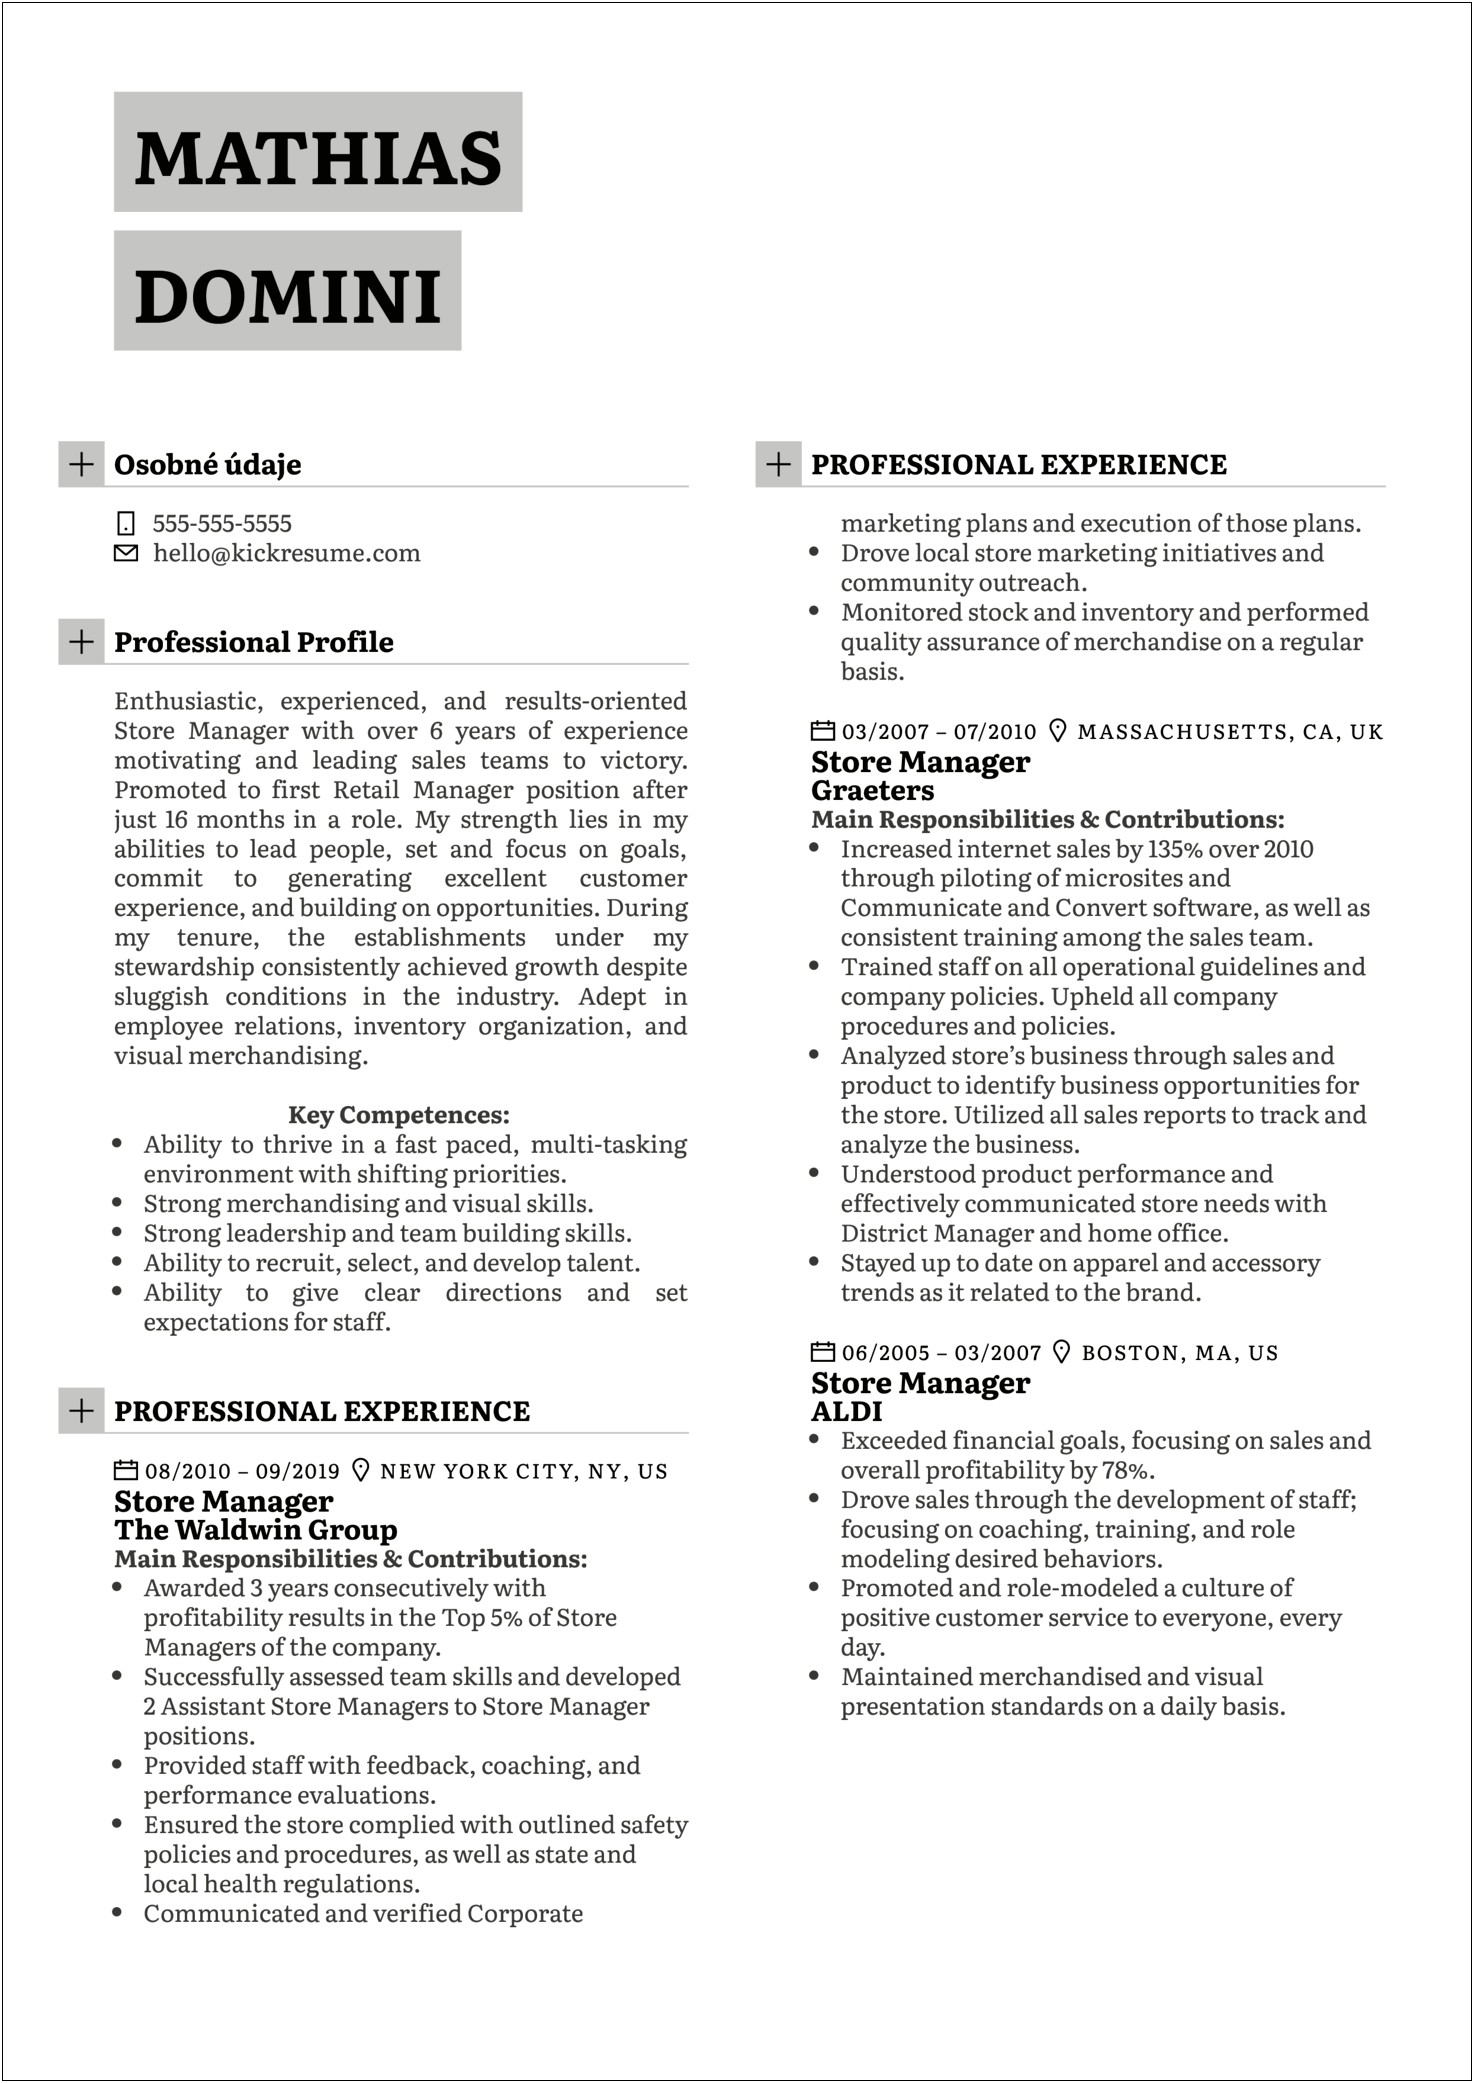 Resumes For Retail Manager Positions